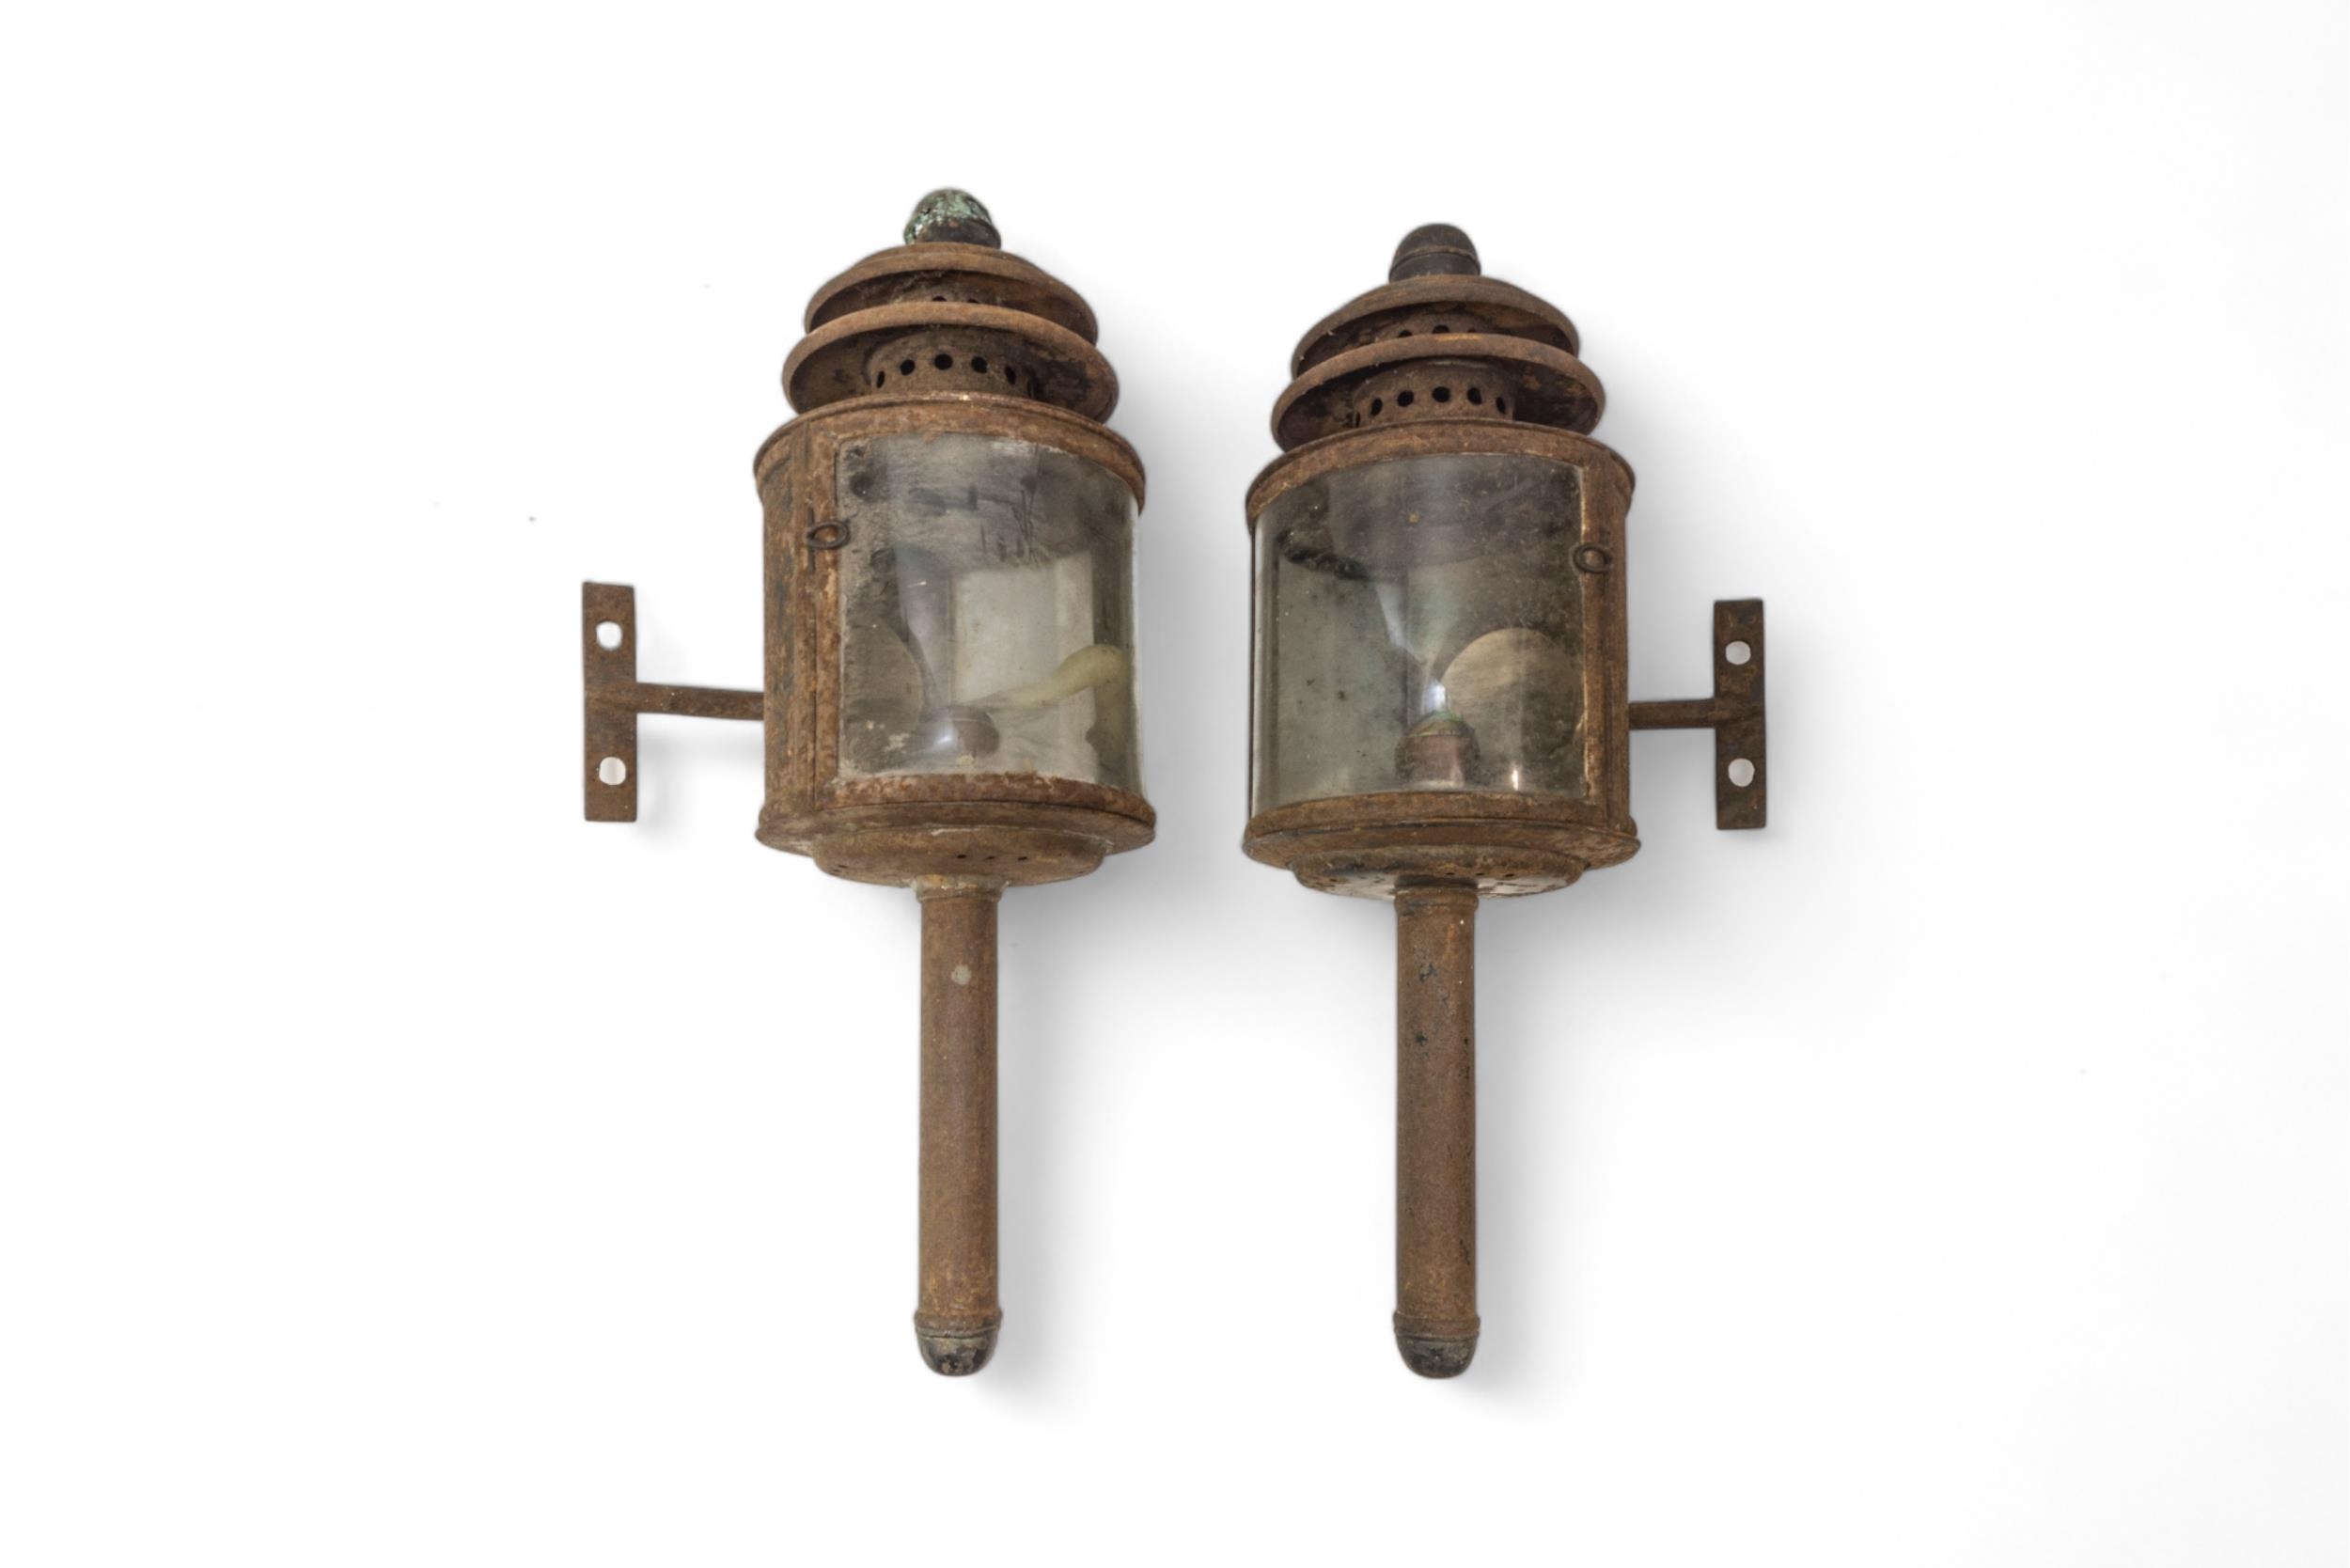 A PAIR OF LARGE 19TH CENTURY CARRIAGE OR OUTDOOR LANTERNS OF CIRCULAR FORM (DISTRESSED) and a pair - Image 2 of 4